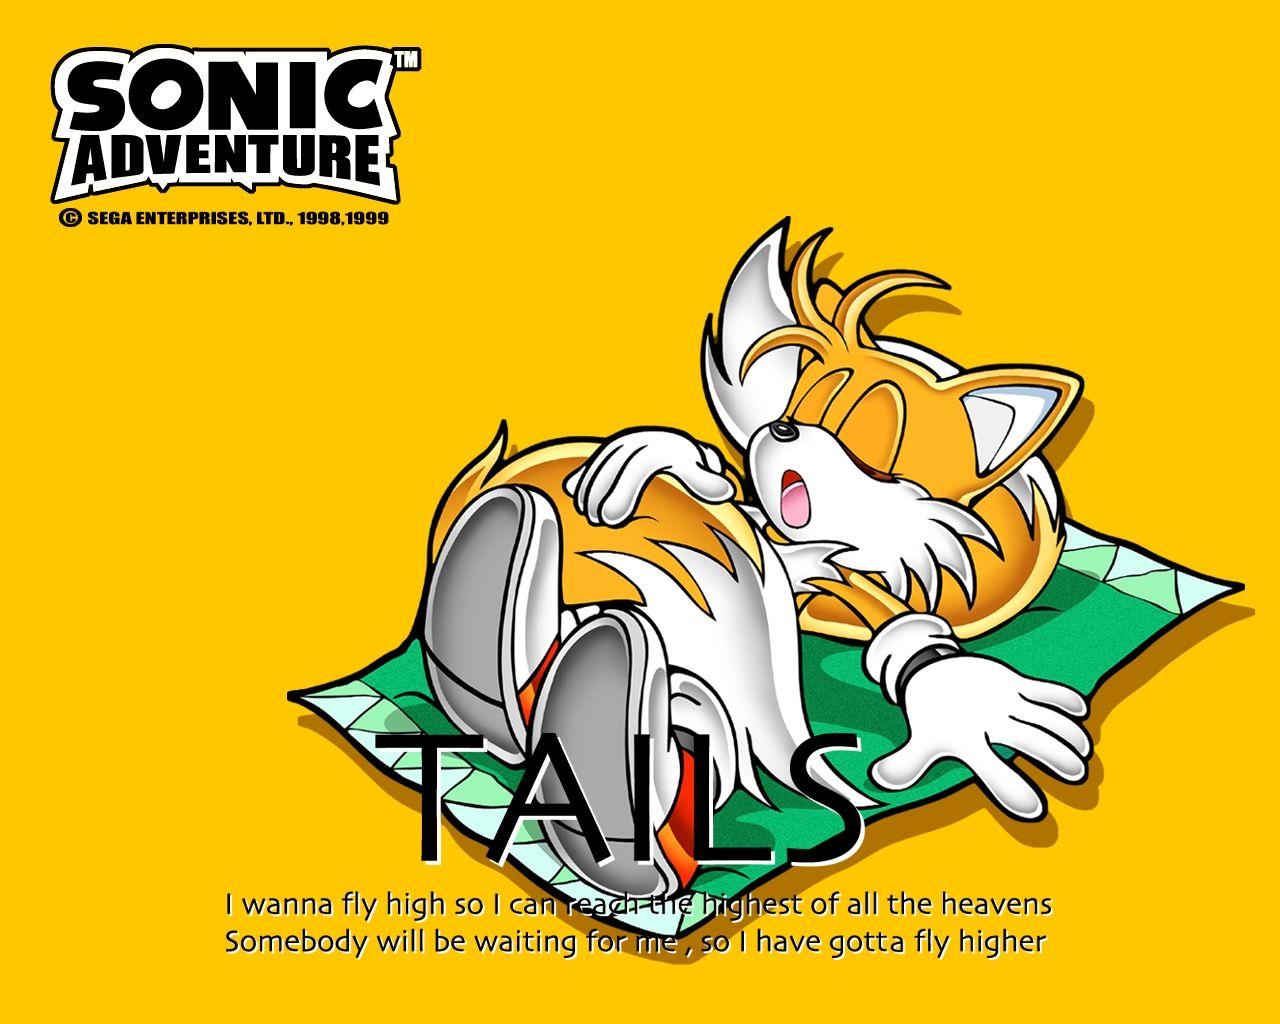 Sonic and Tails Wallpaper